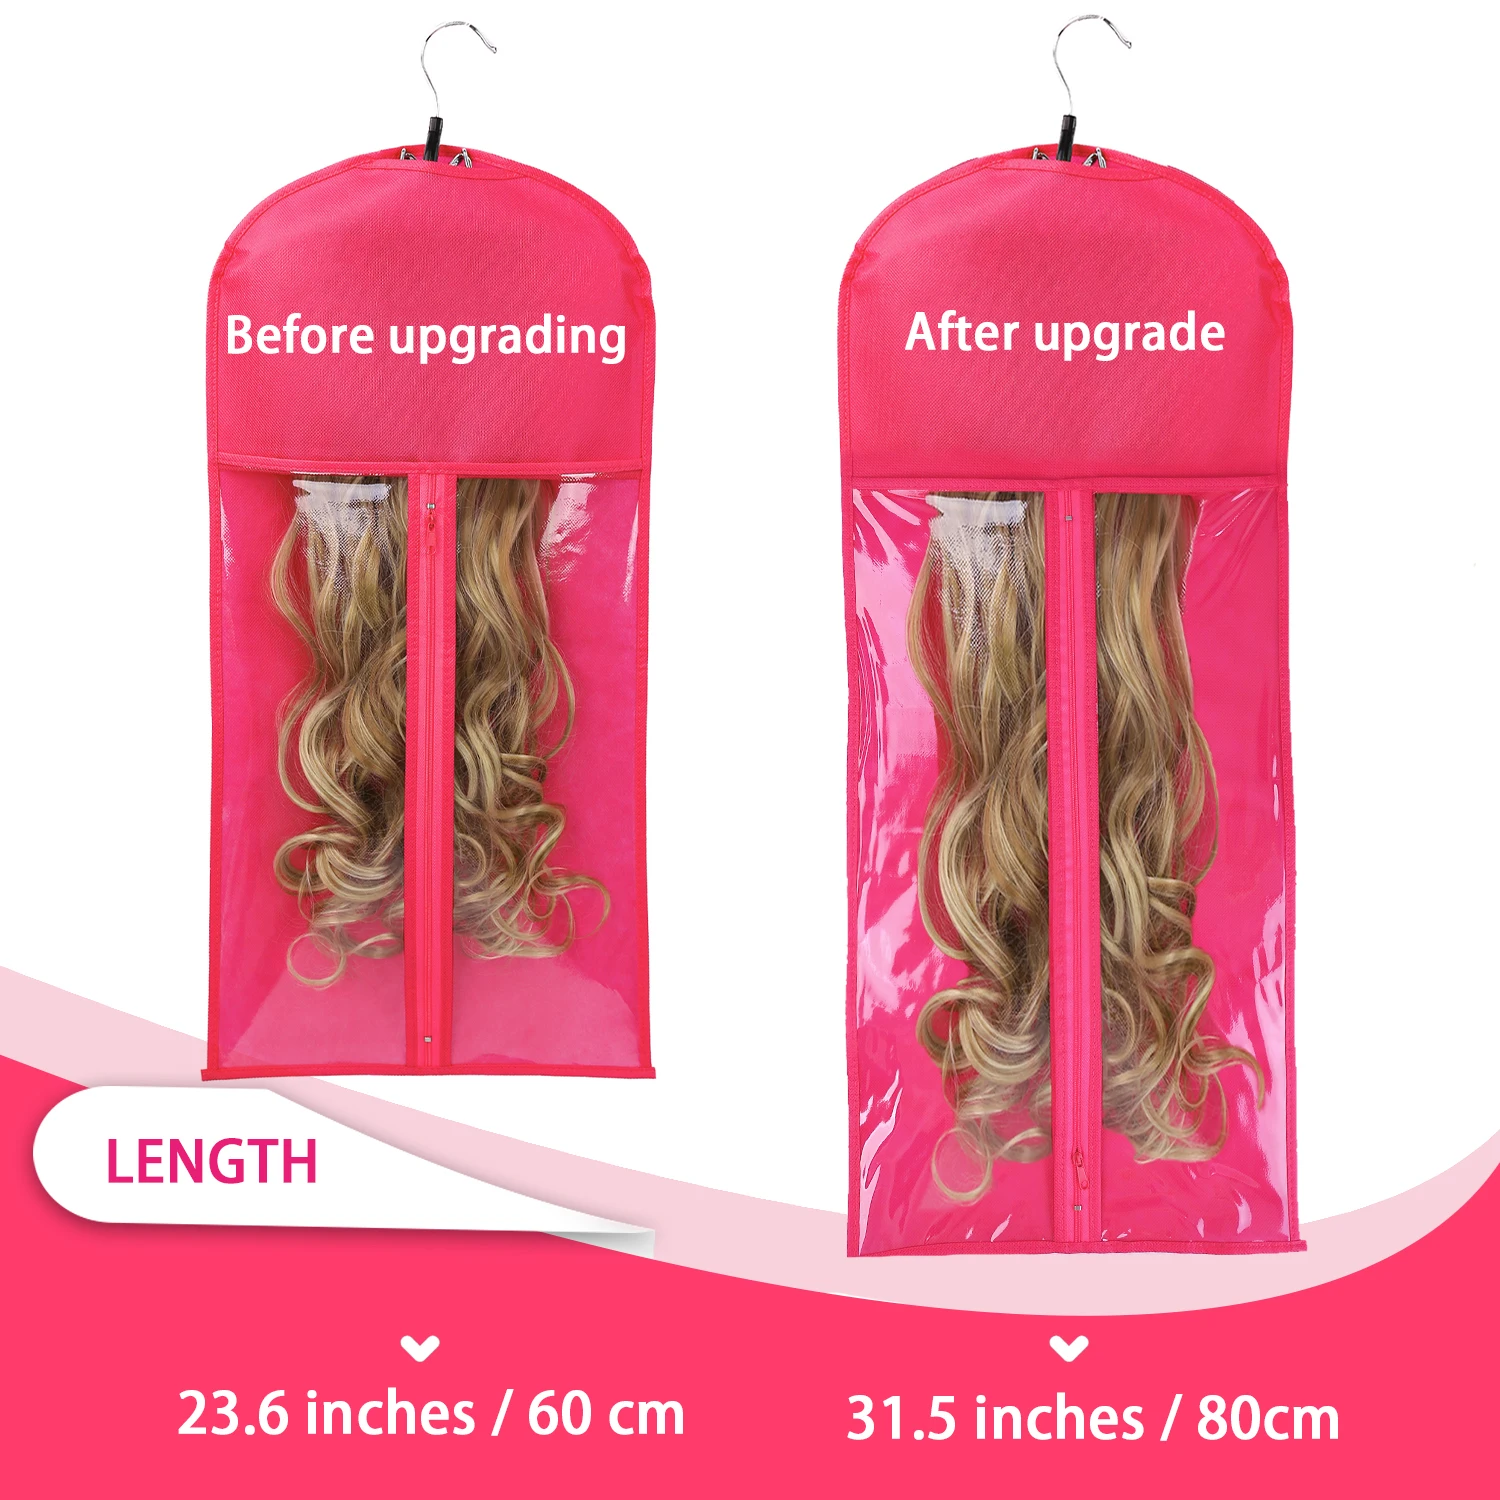 5Pcs Dust-proof Storage Carrier Case For Wigs Hair Extensions Hairpiece Storage Portable Travel Hair Bag With Hanger